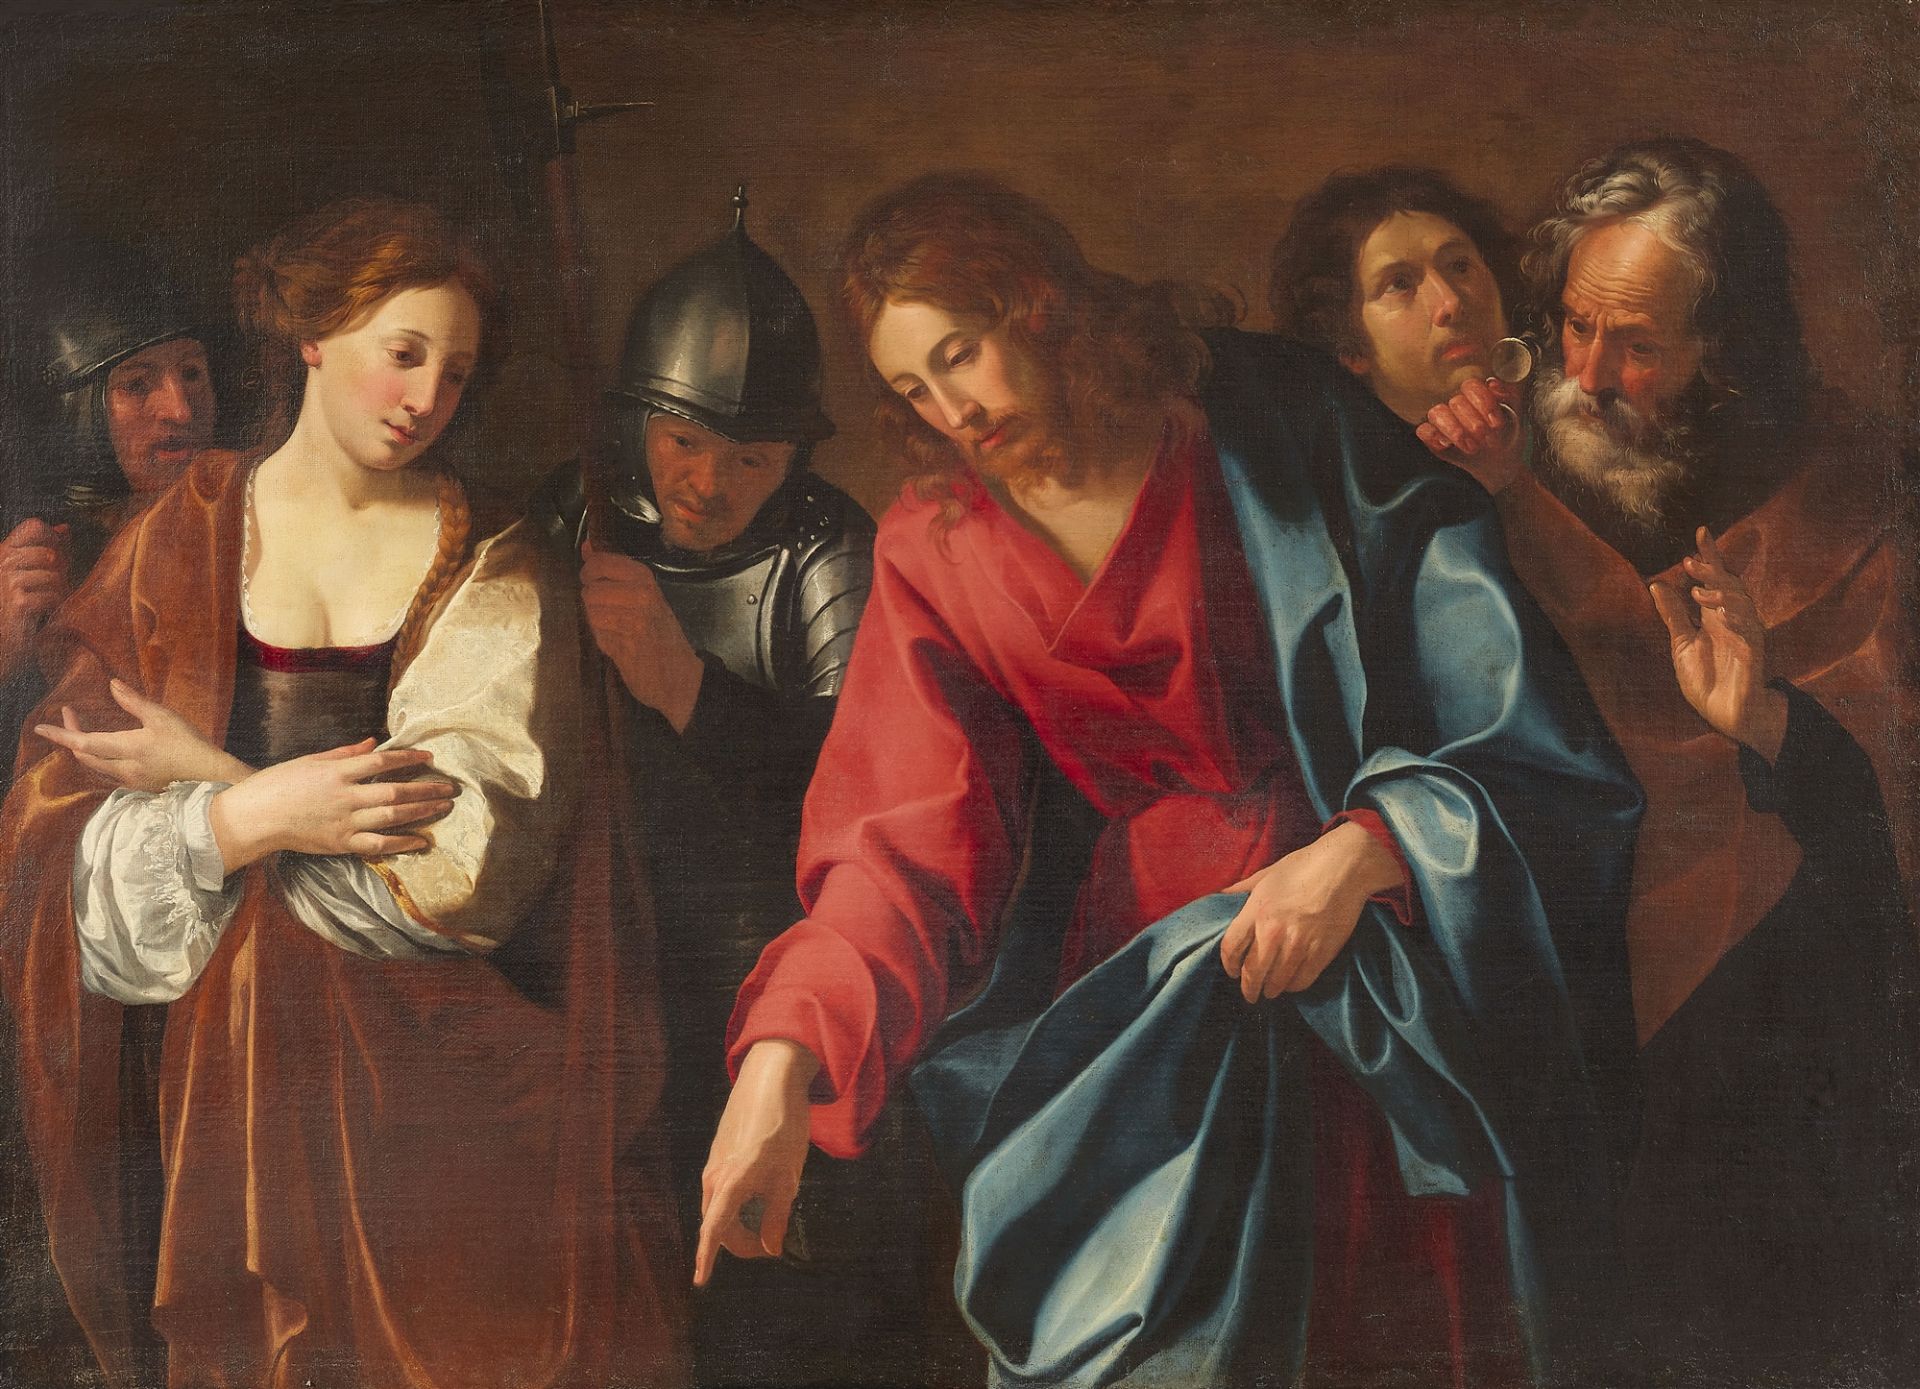 Französischer Caravaggist of the 17th century, Christ and the Adulteress